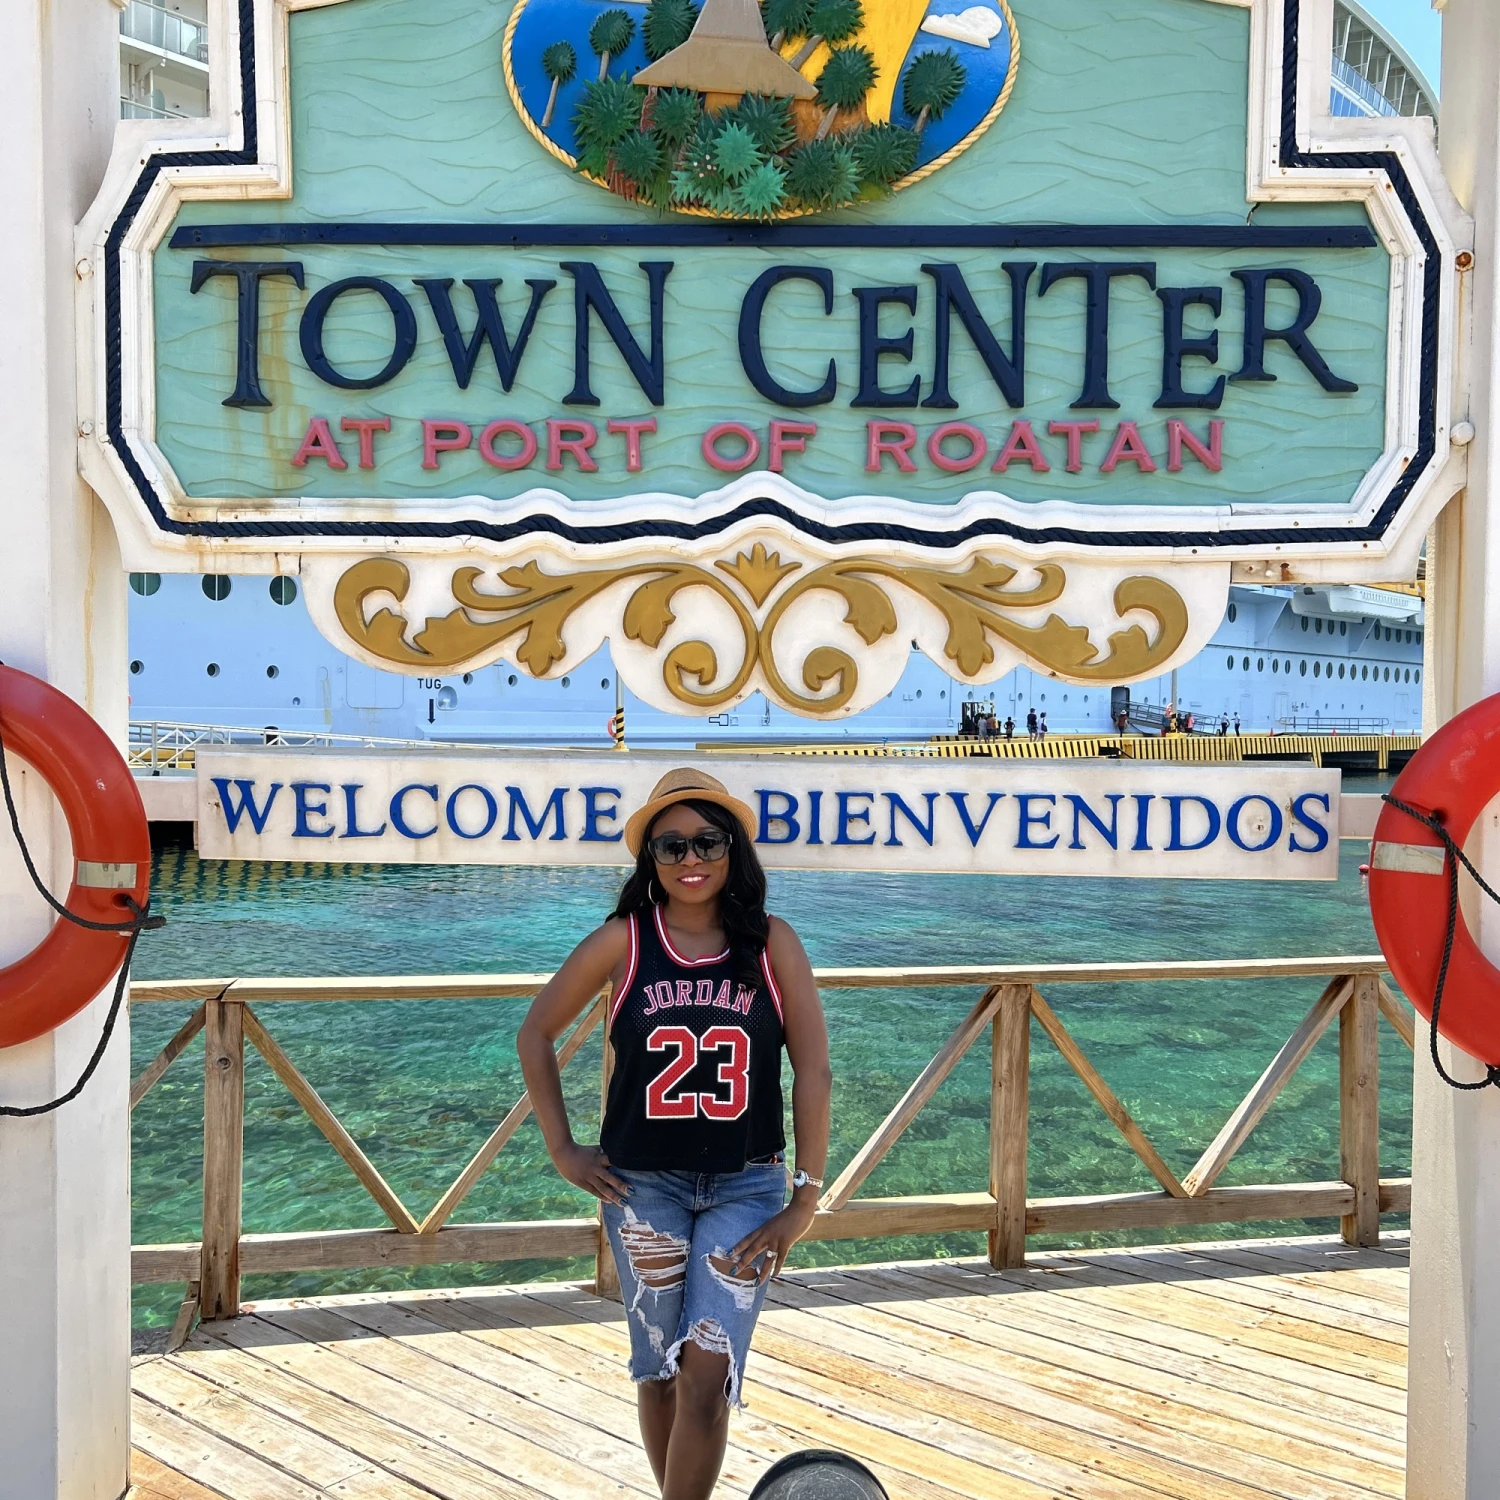 travel advisor stands in front of a large sign that reads, "town center"